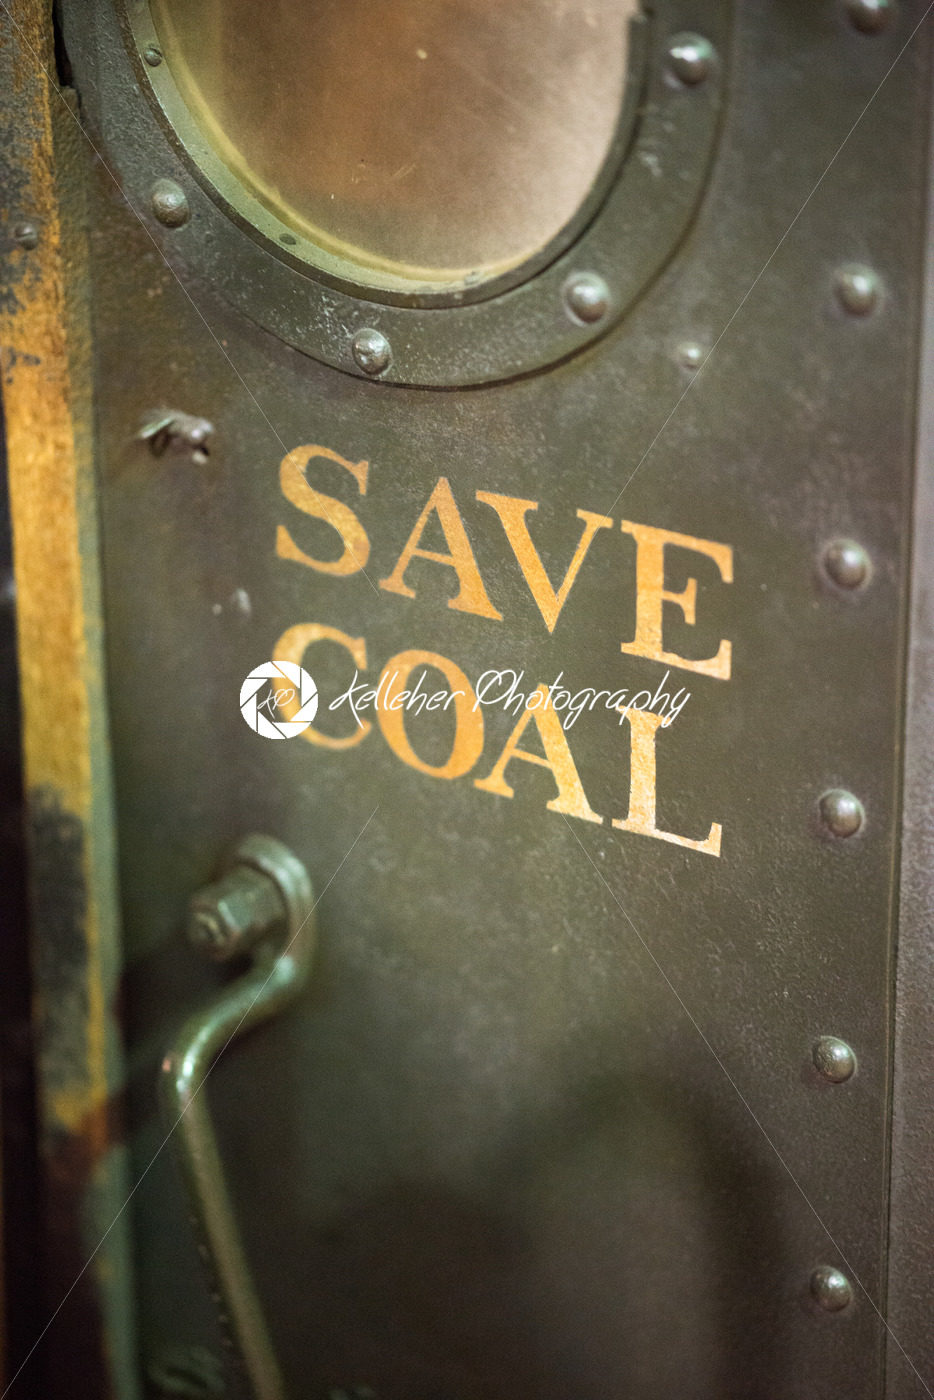 BALITMORE, MD – APRIL 15: Save Coal on old steam powered locomotive engine on April 15, 2017 - Kelleher Photography Store